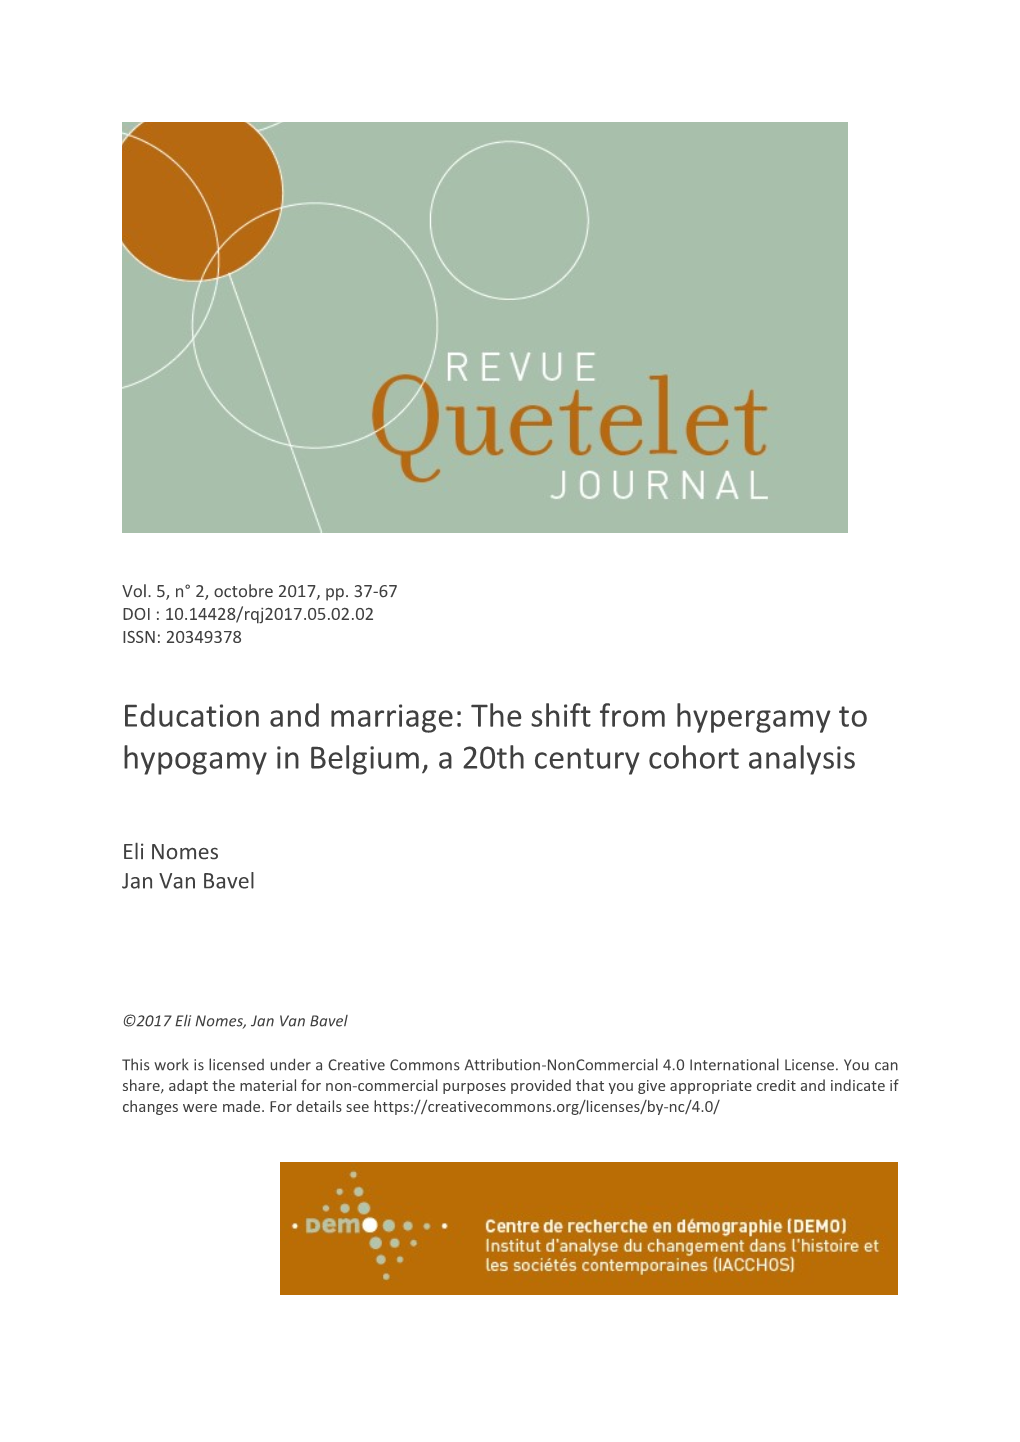 Education and Marriage: the Shift from Hypergamy to Hypogamy in Belgium, a 20Th Century Cohort Analysis